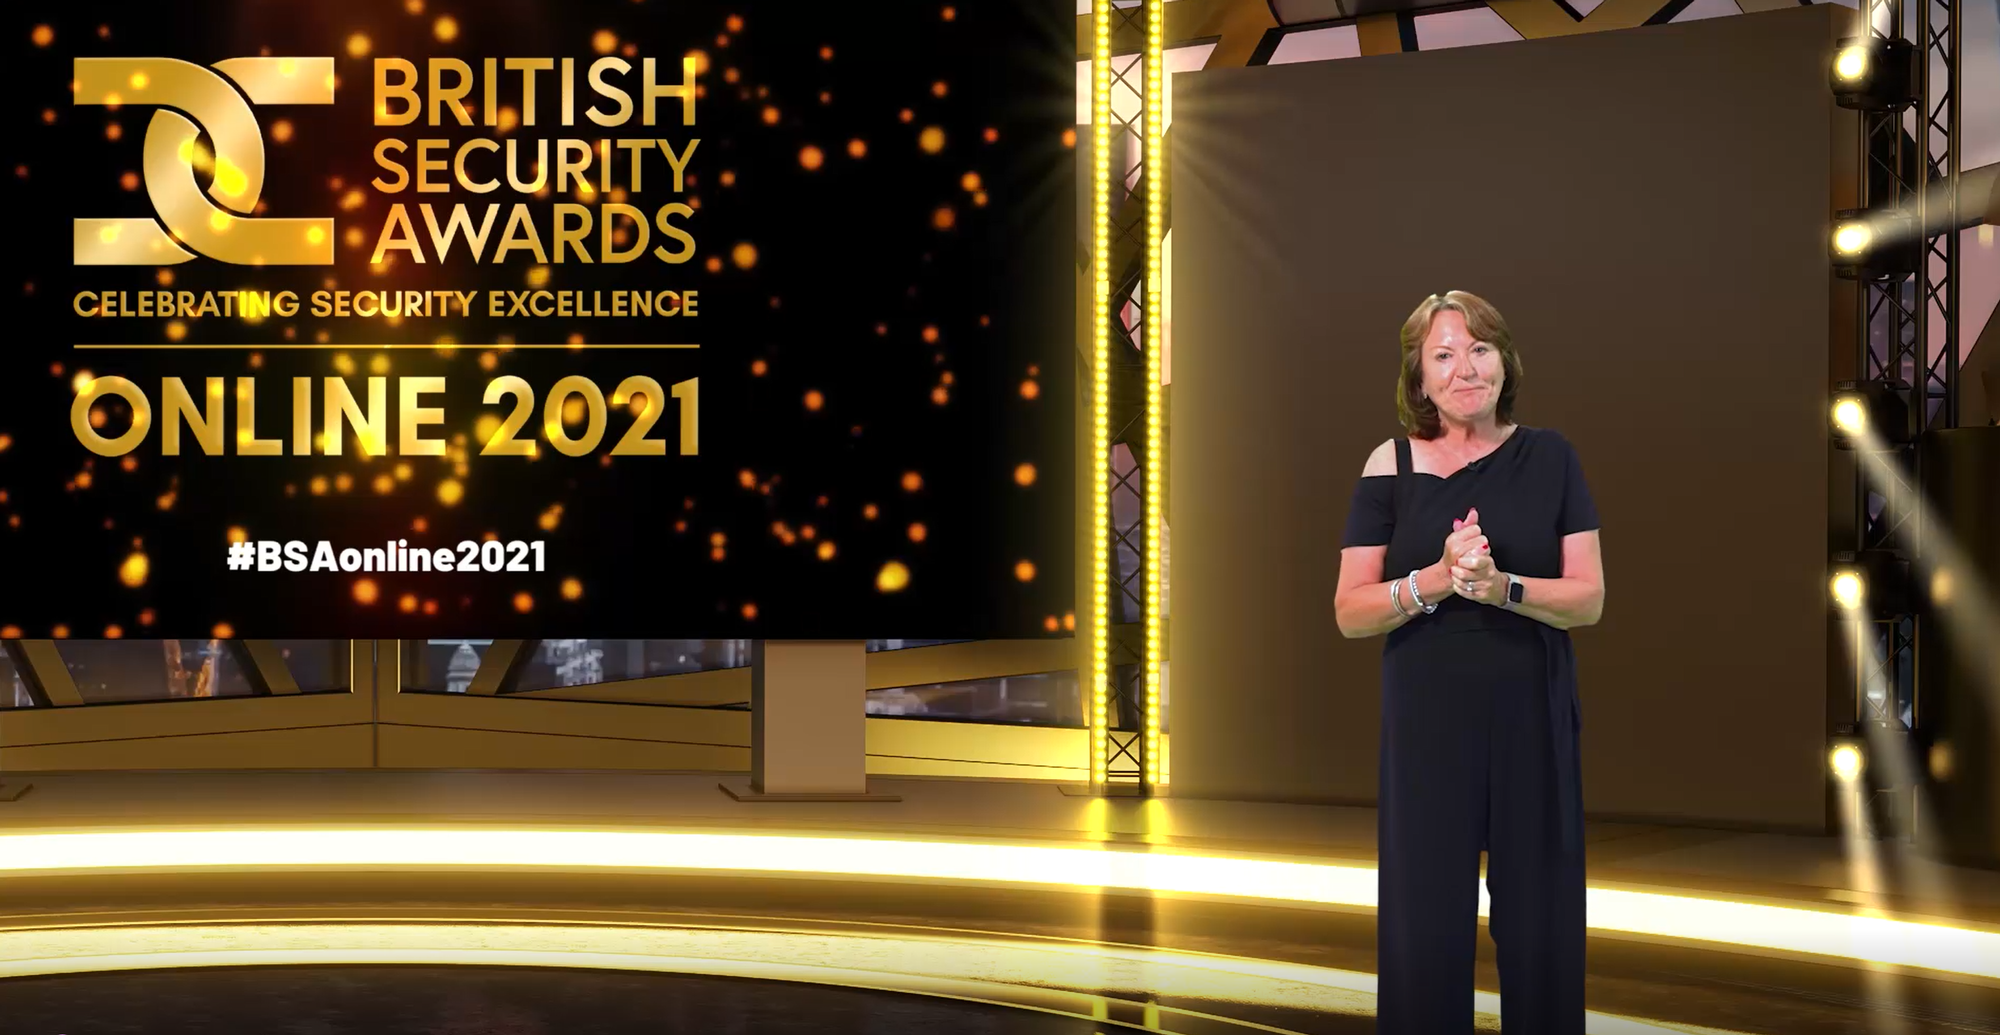 British Security Awards Online 2021 –security officers and companies recognised for their contribution in keeping people places and property safe